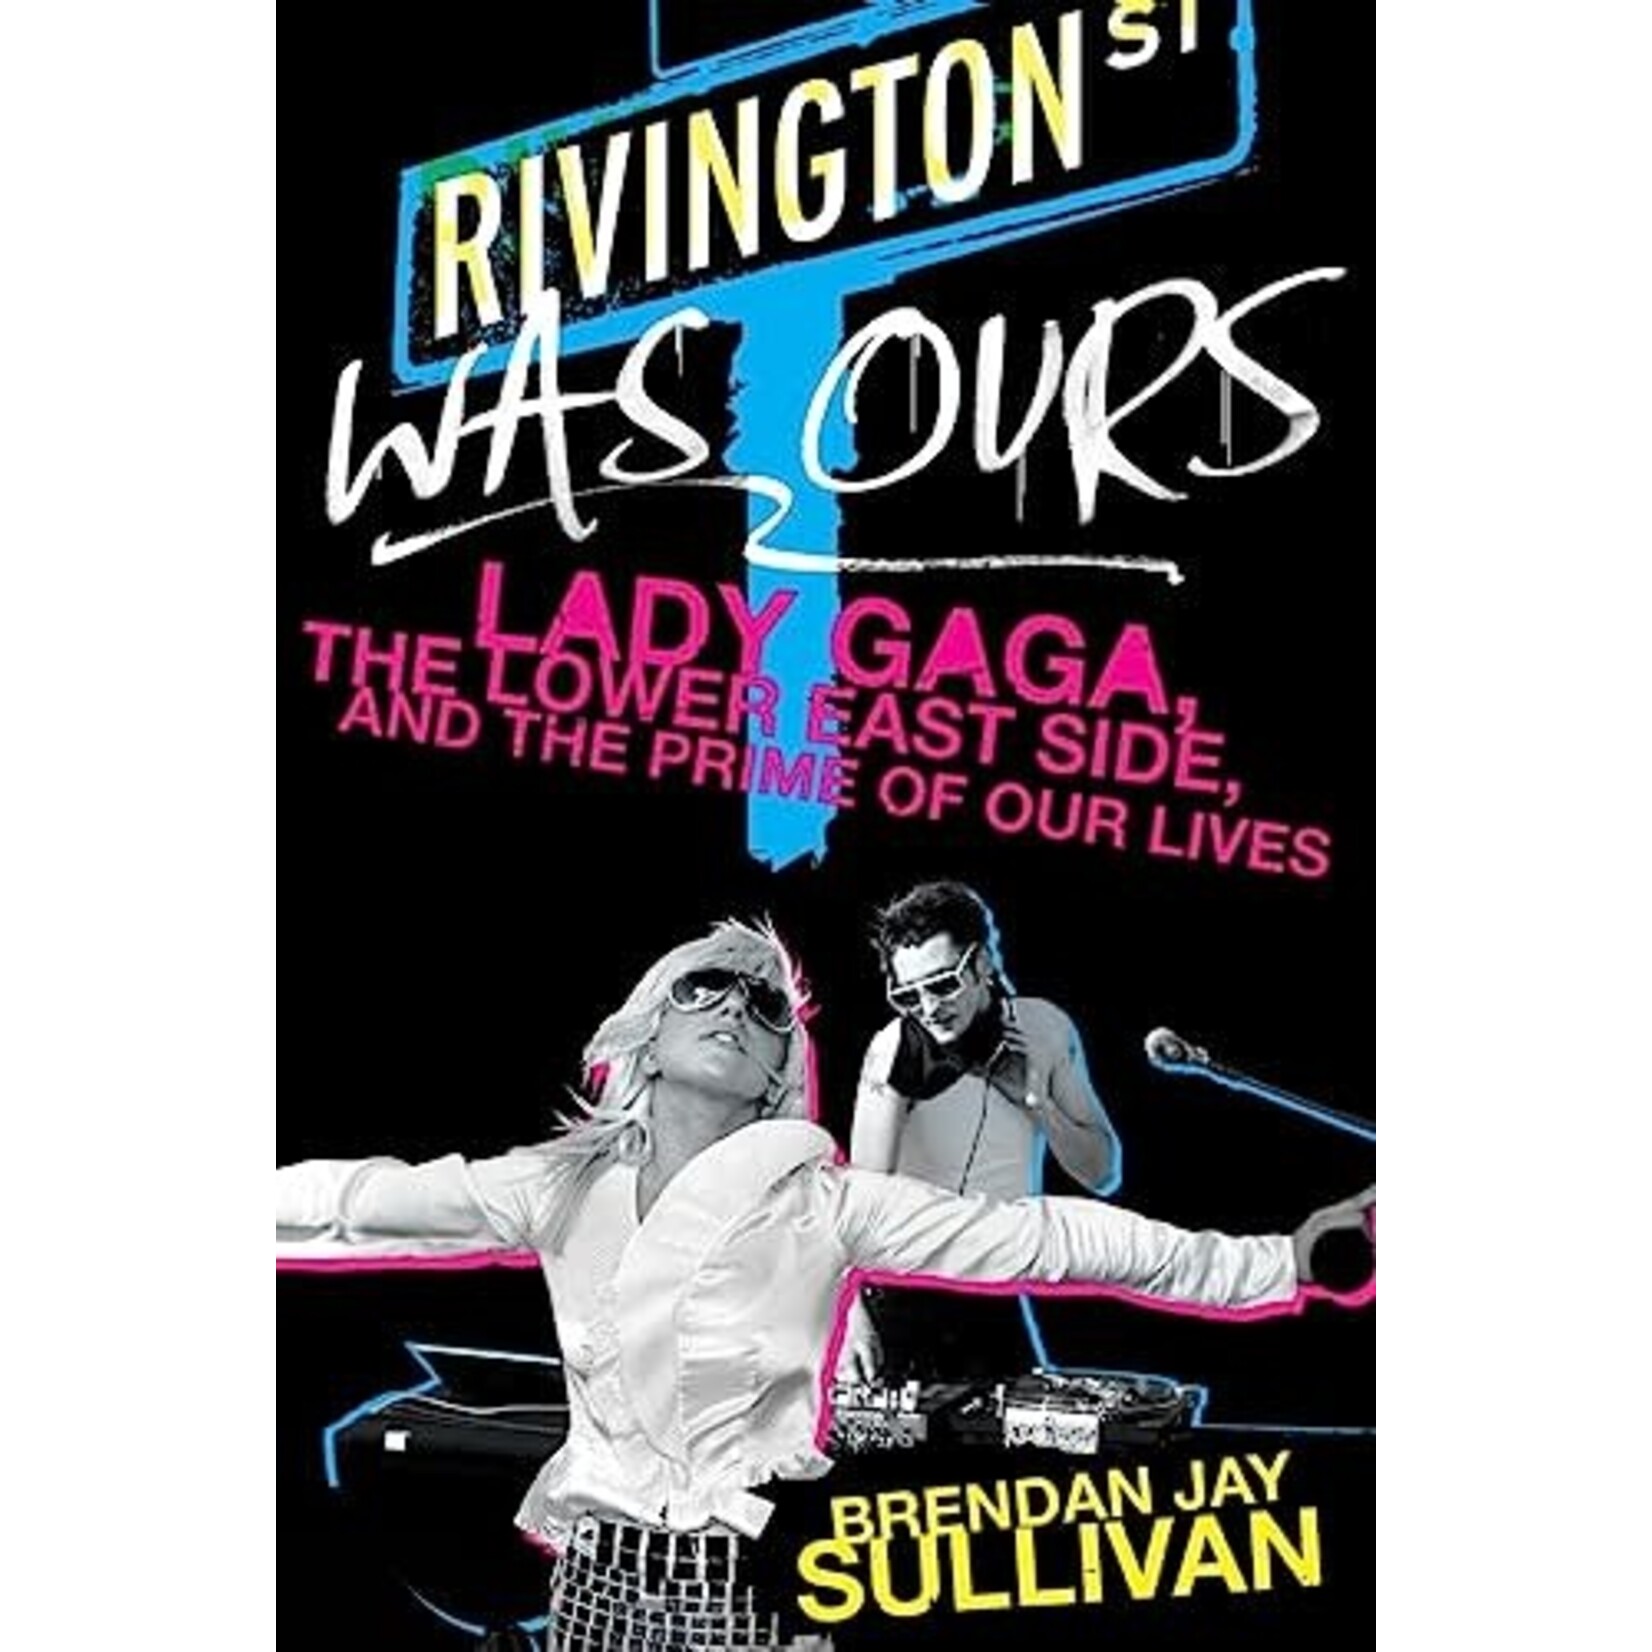 Rivington Was Ours: Lady Gaga, The Lower East Side, And The Prime Of Our Lives [Book]